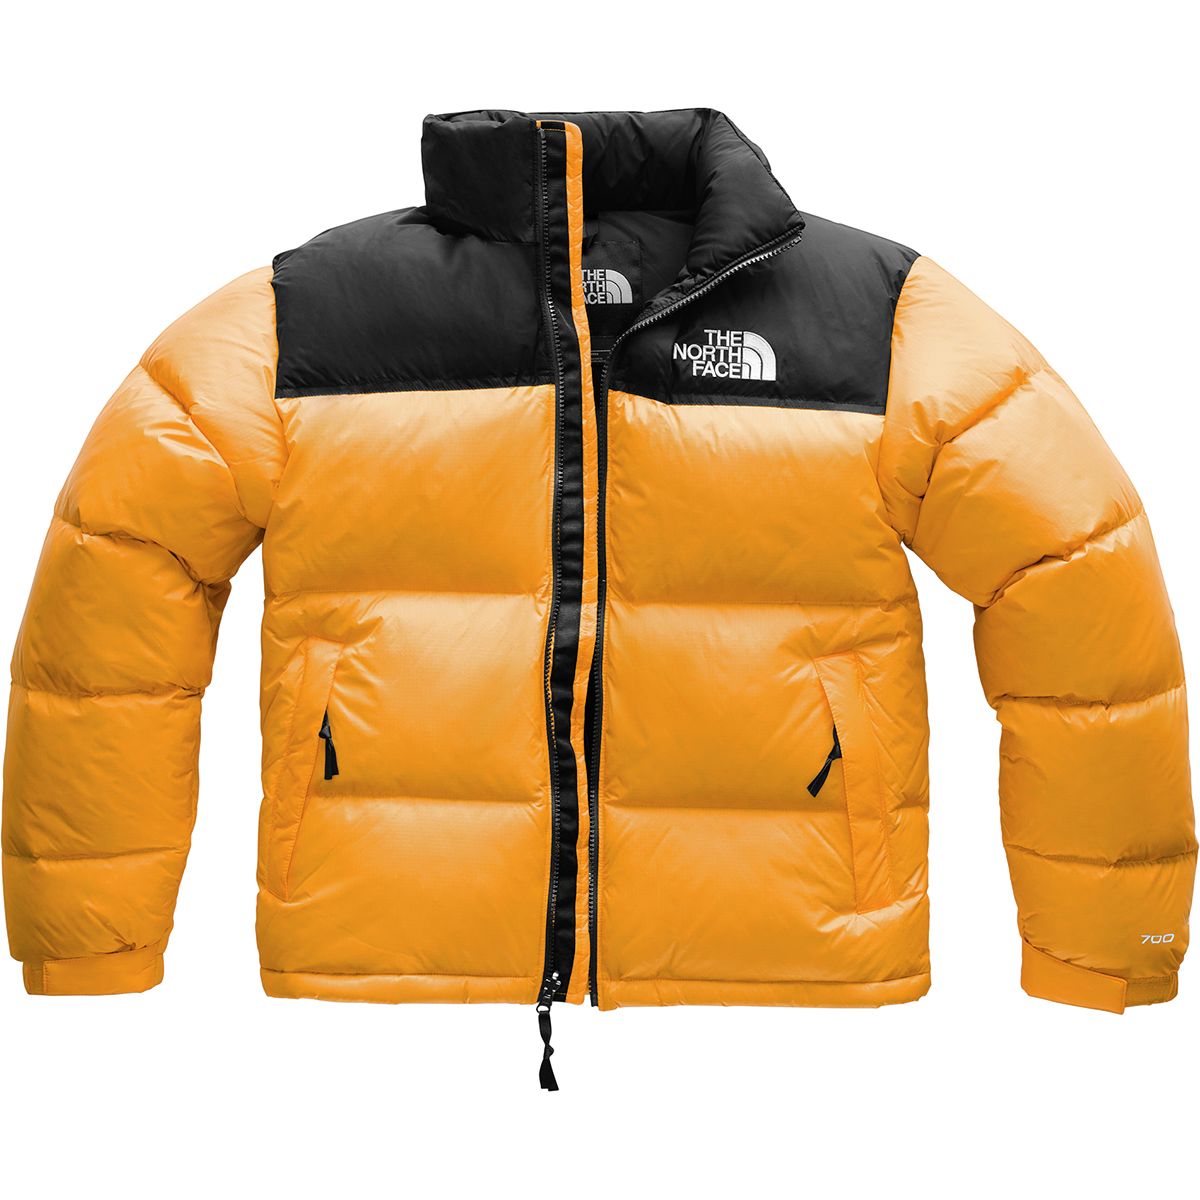 The North Face - Men's Jackets, Coats, Parkas. Sustainable fashion and